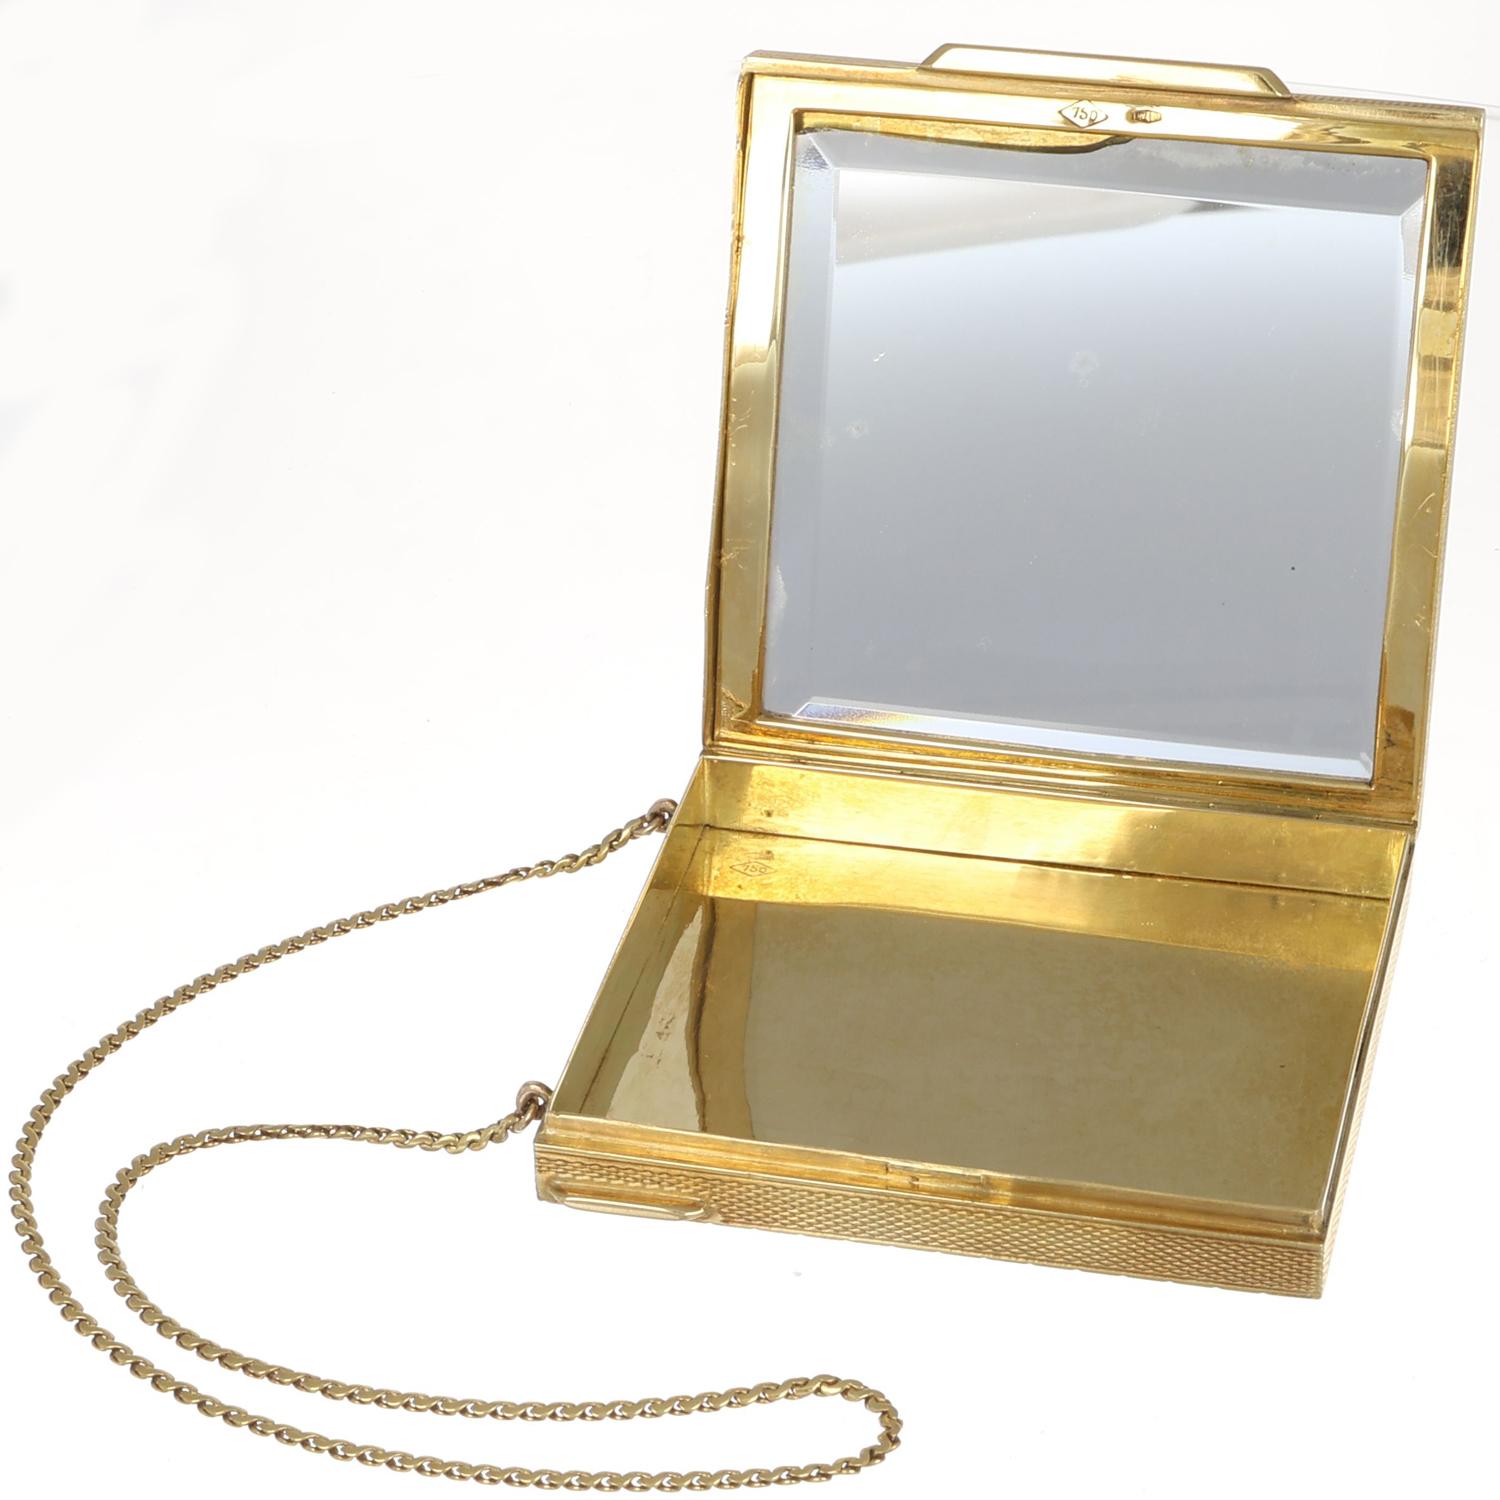 18Kt Gold Rare Compact Powder Box with Chain - Made in Italy 1970 circa  For Sale 5